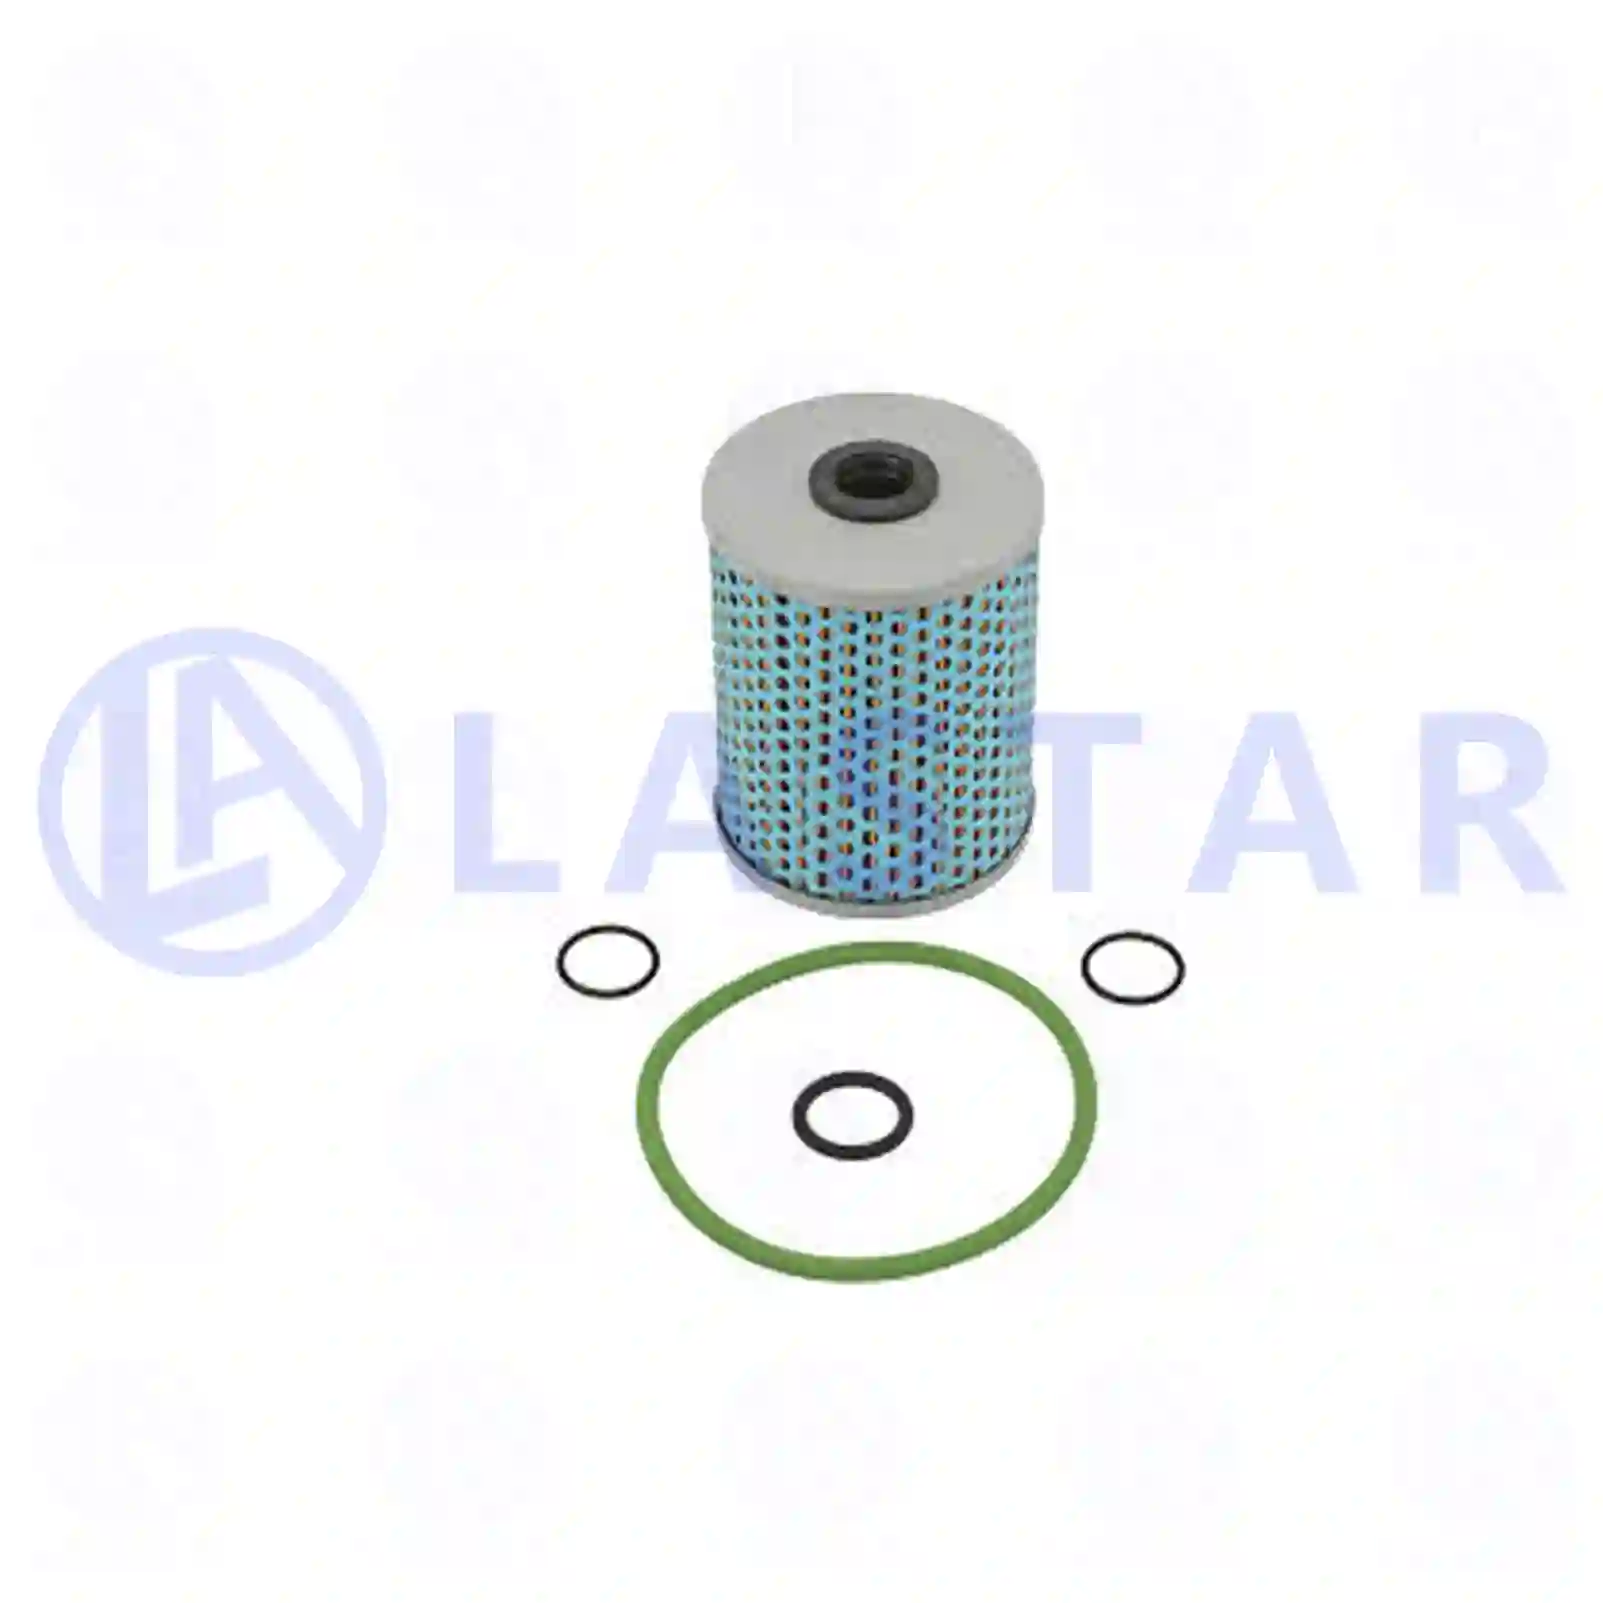 Oil filter, with seal rings, 77733235, 550154, ZG01726-0008, ||  77733235 Lastar Spare Part | Truck Spare Parts, Auotomotive Spare Parts Oil filter, with seal rings, 77733235, 550154, ZG01726-0008, ||  77733235 Lastar Spare Part | Truck Spare Parts, Auotomotive Spare Parts